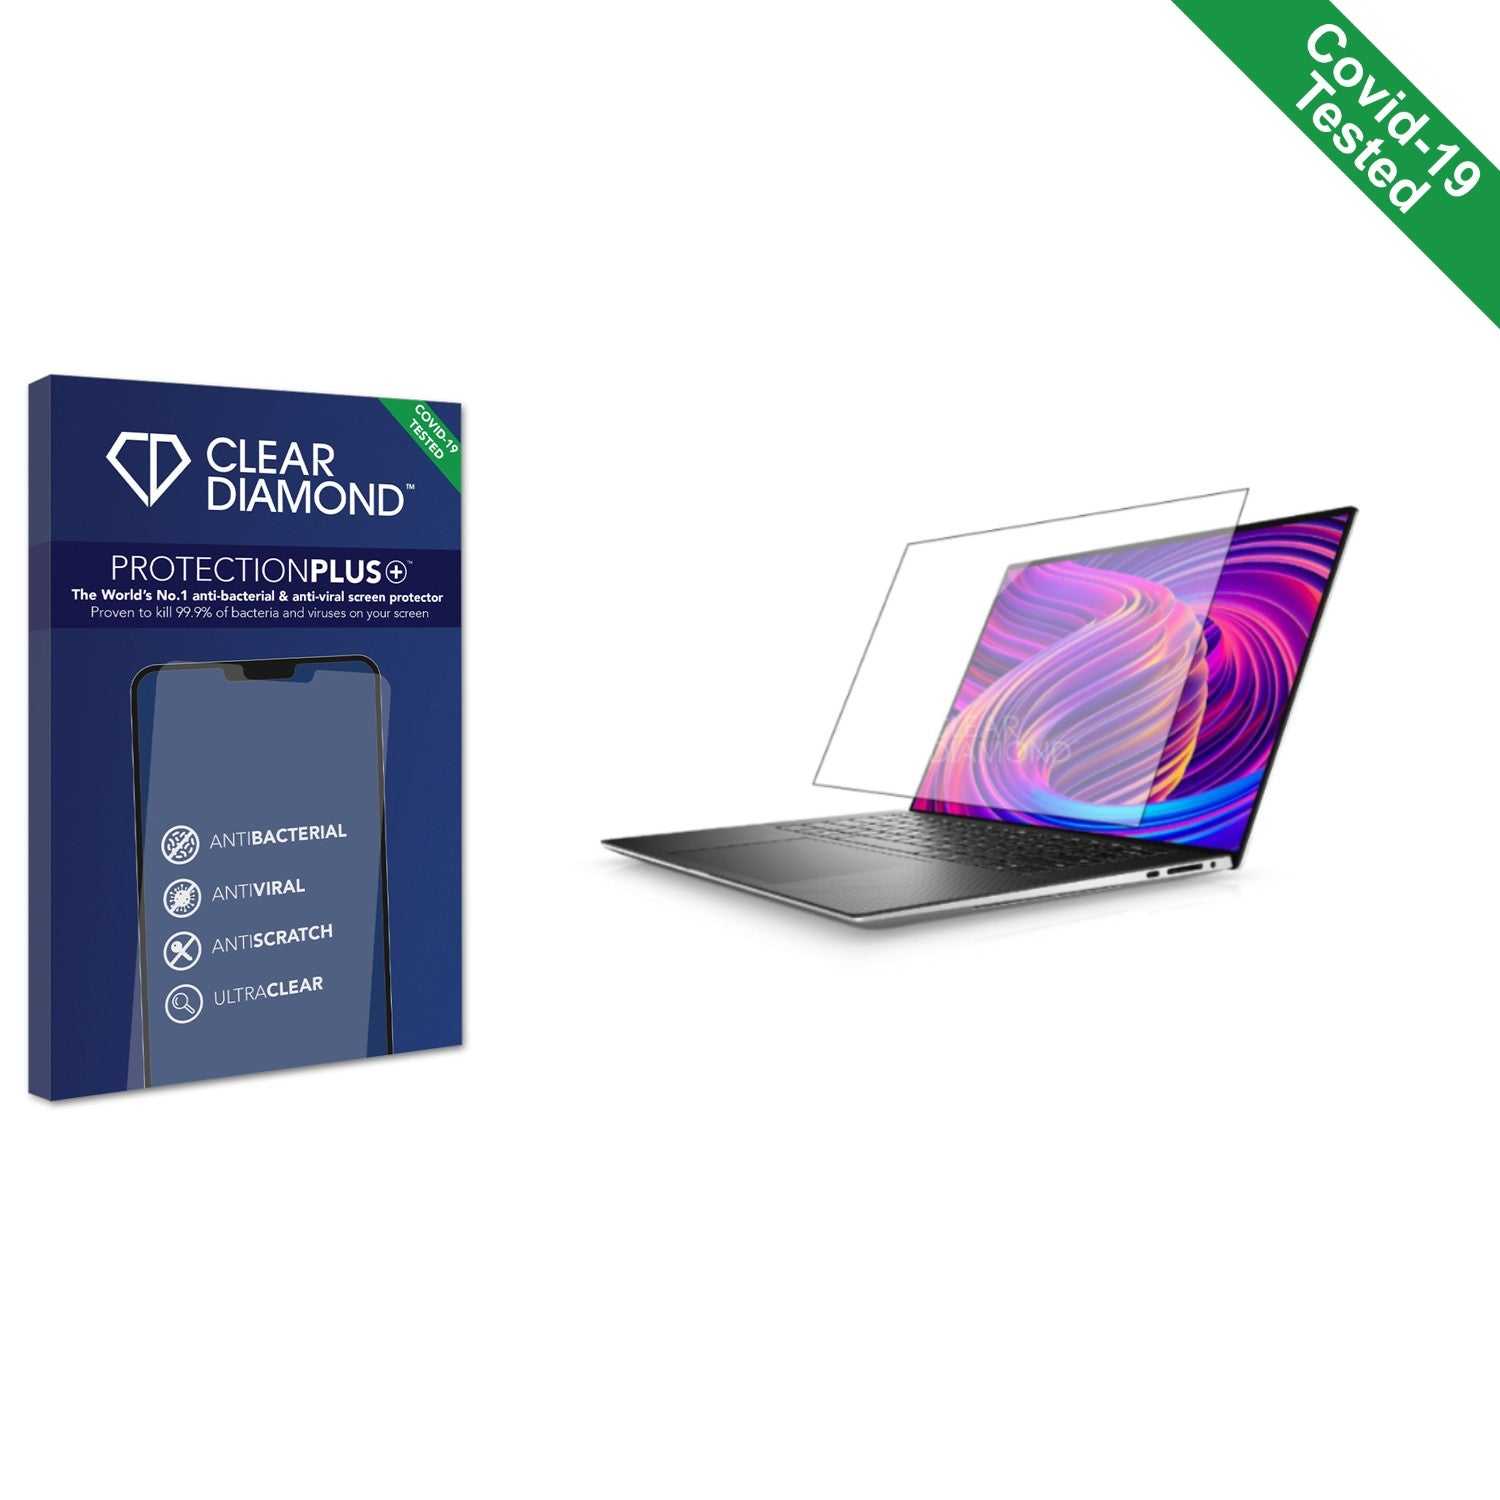 ScreenShield, Clear Diamond Anti-viral Screen Protector for Dell XPS  15 16:10 (13.Gen)